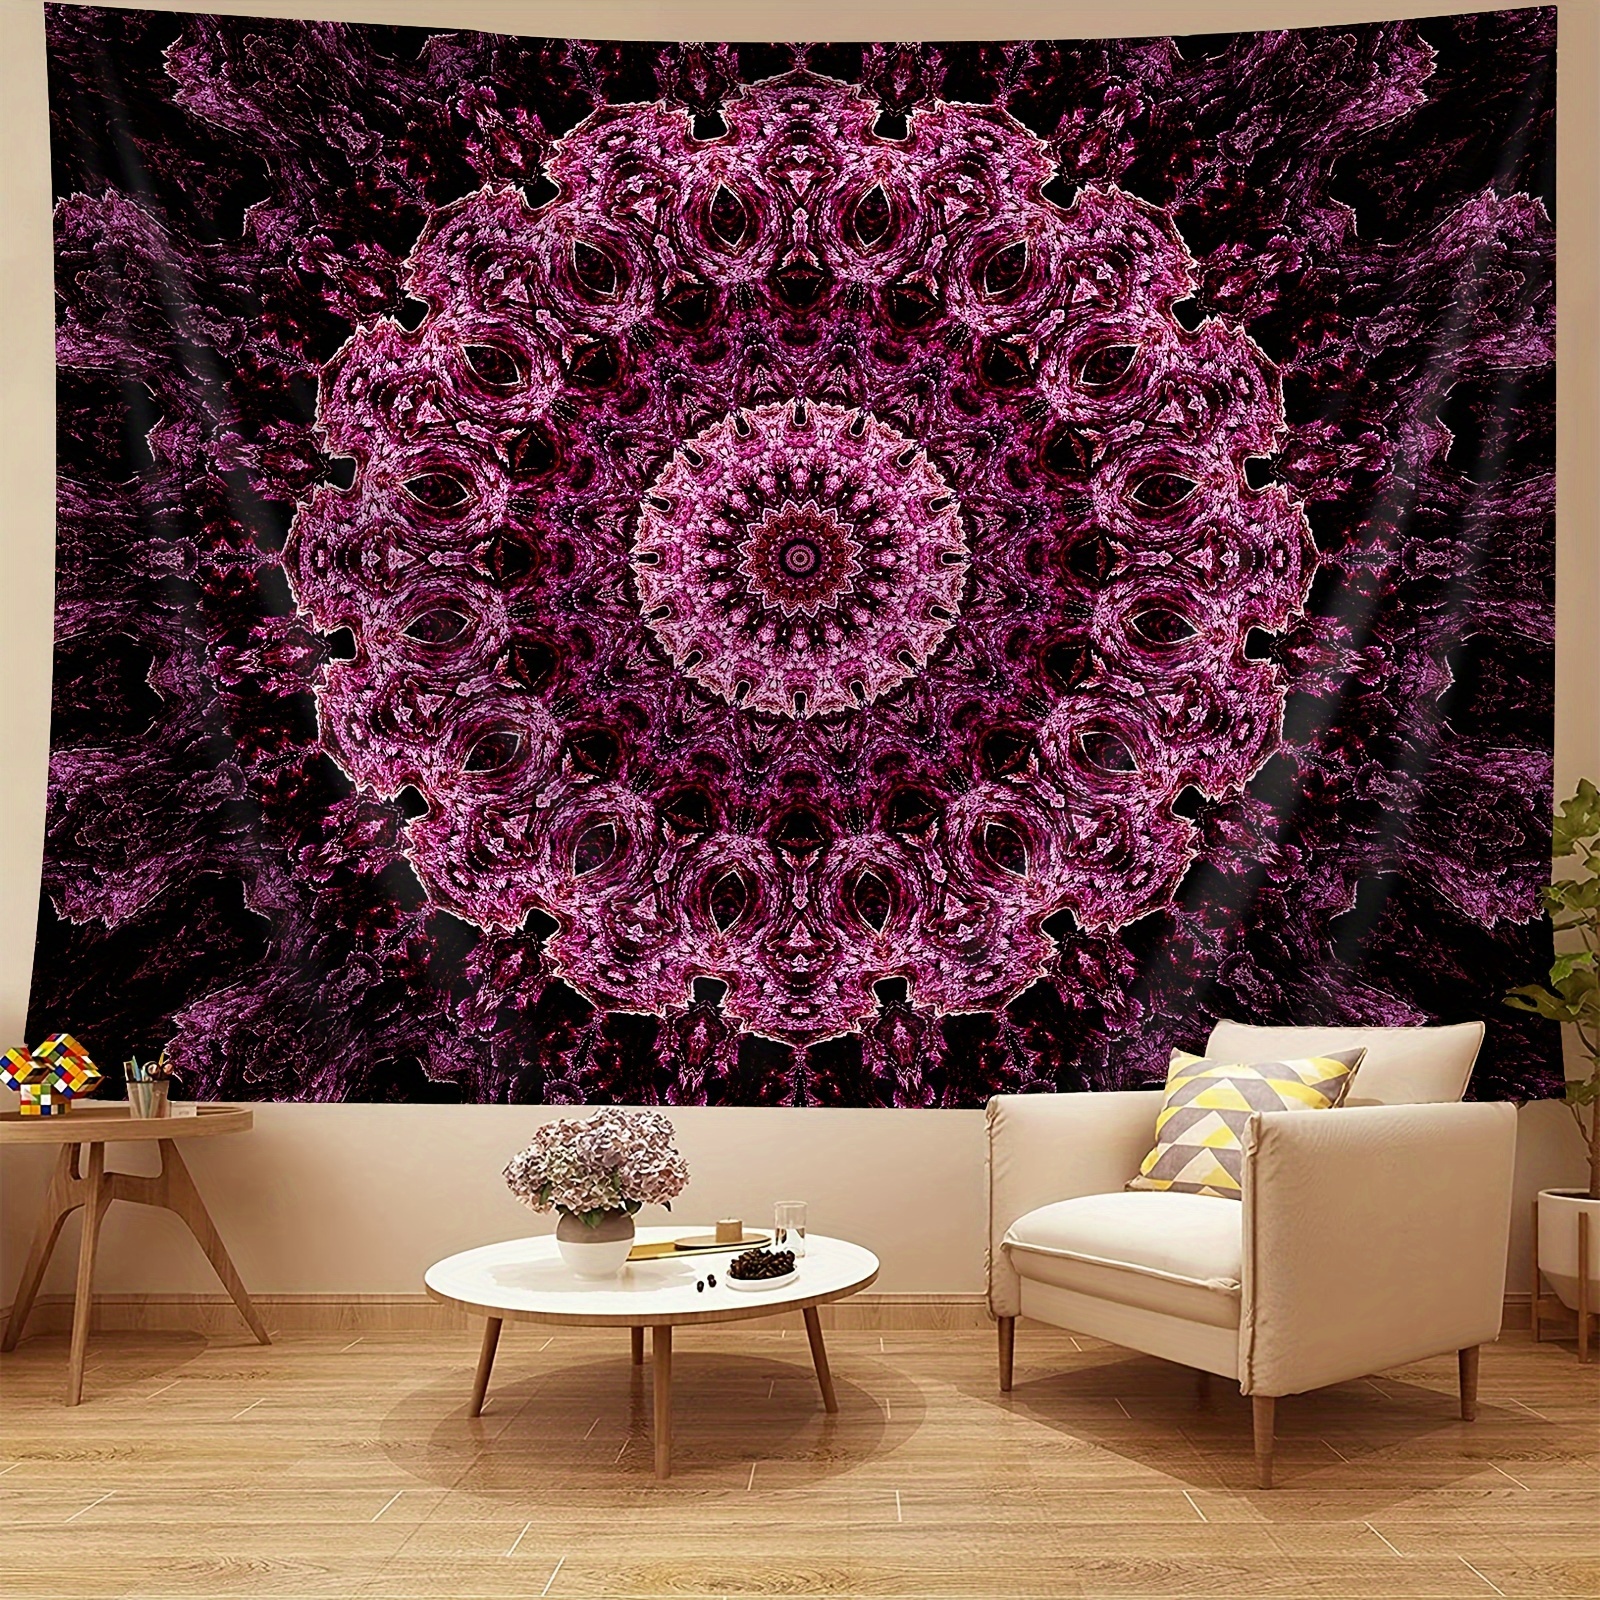 

1pc Bohemian Mandala Pattern Tapestry, Polyester Tapestry, Wall Hanging For Living Room Bedroom Office, Home Decor Room Decor Party Decor, With Free Installation Package